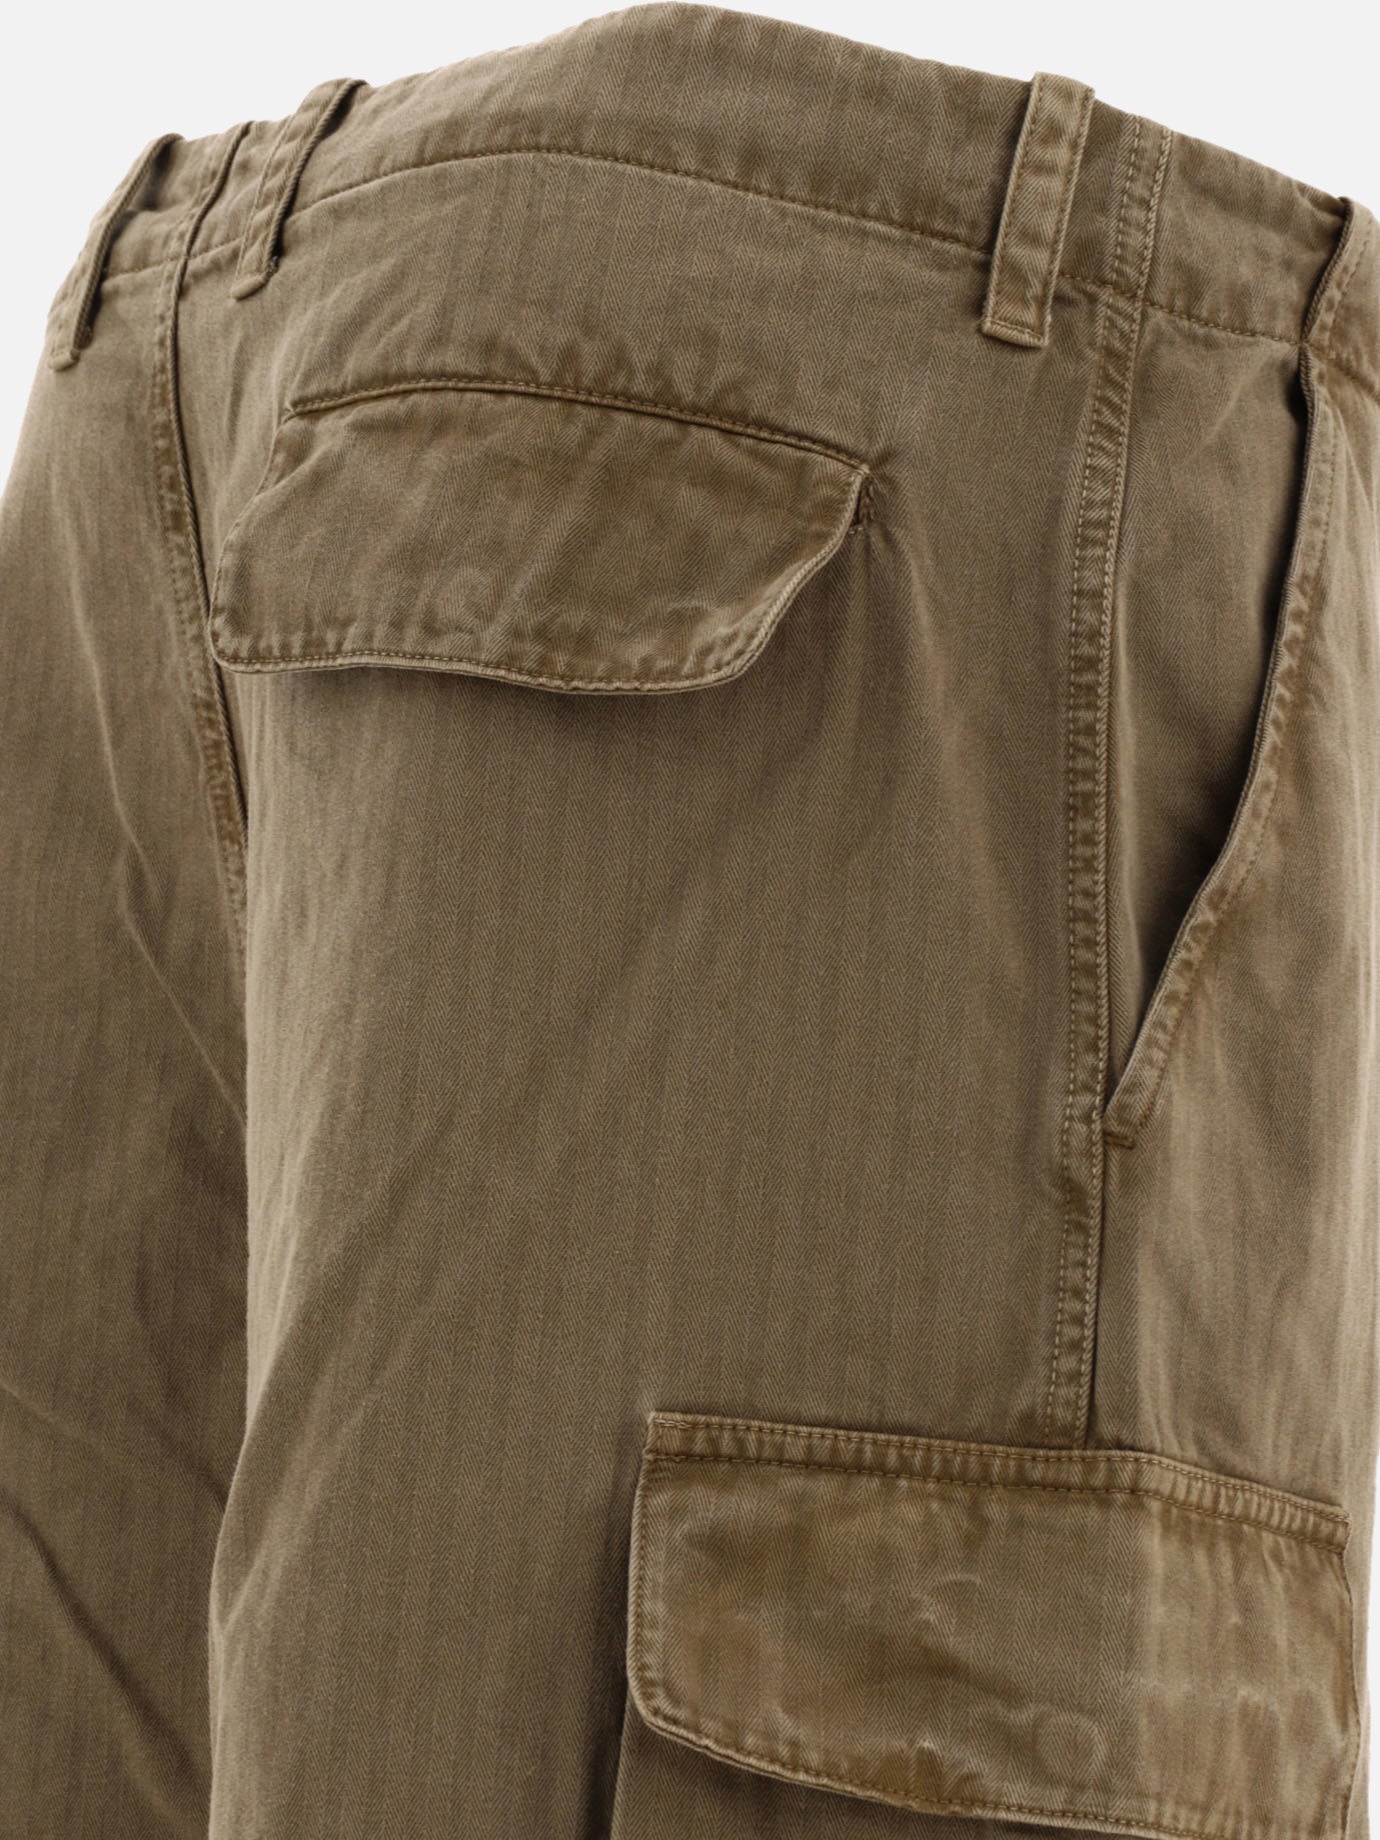 "Mount" cargo trousers